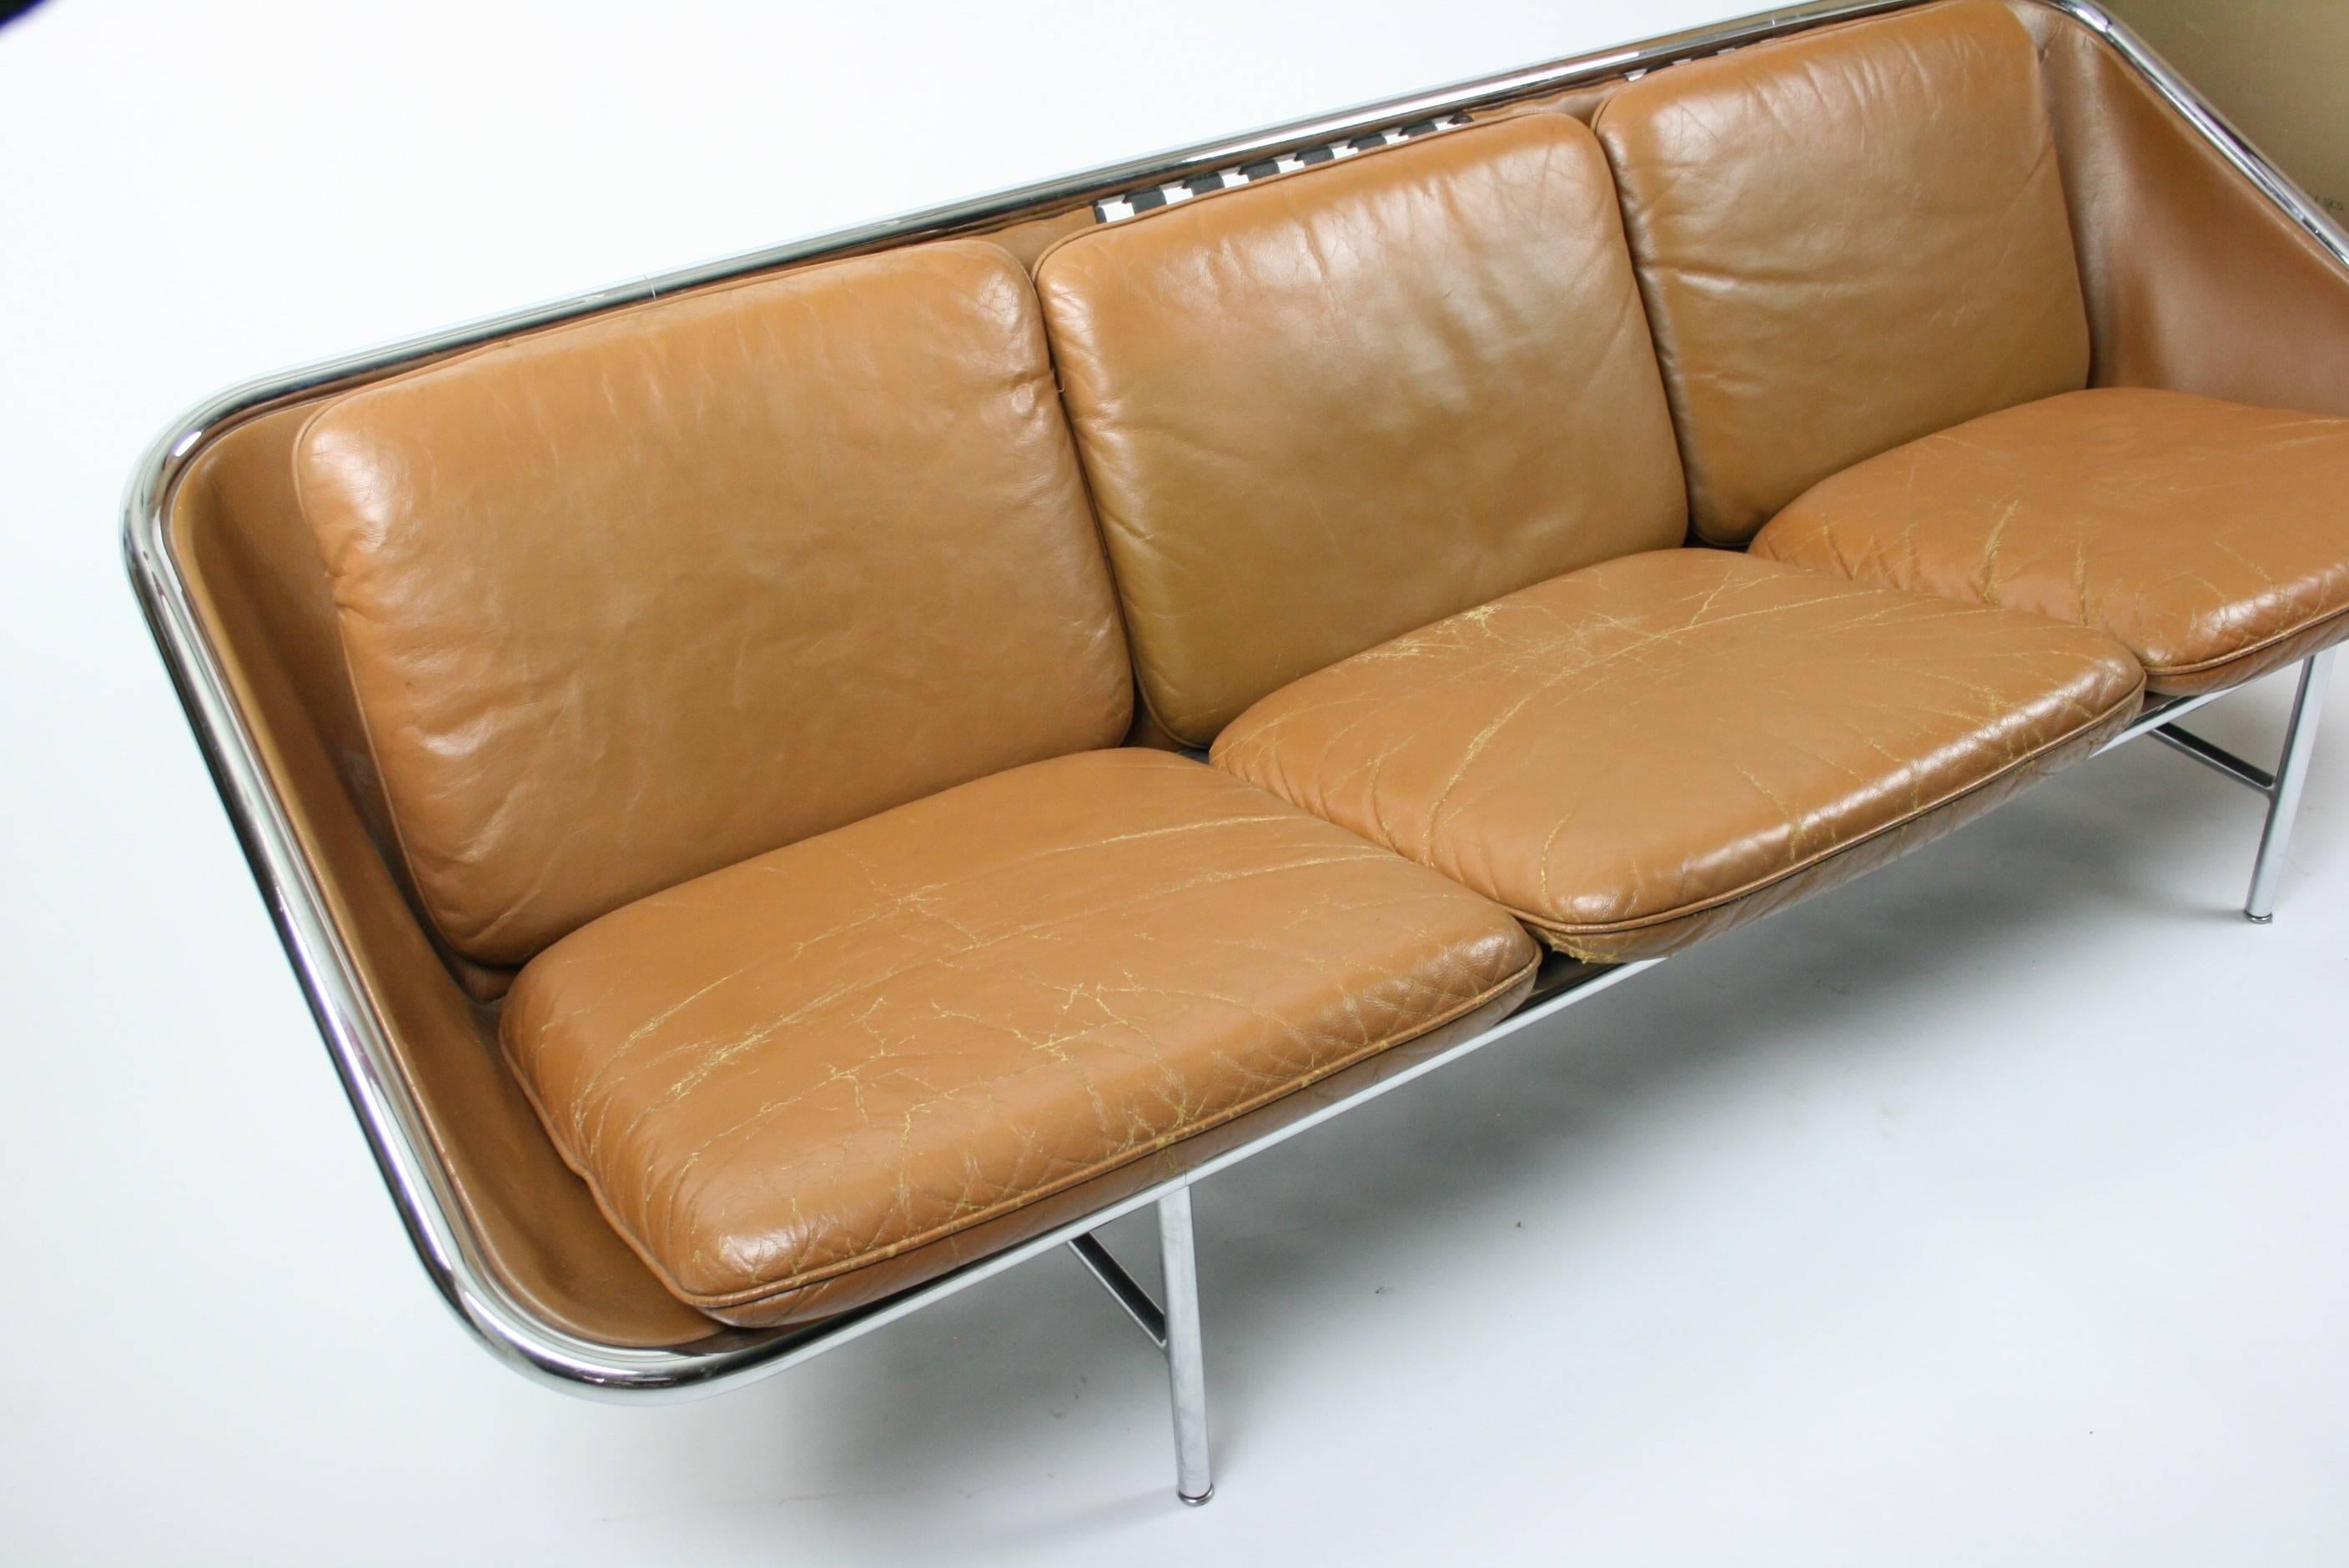 Steel George Nelson Sling Sofa in Brown Leather for Herman Miller